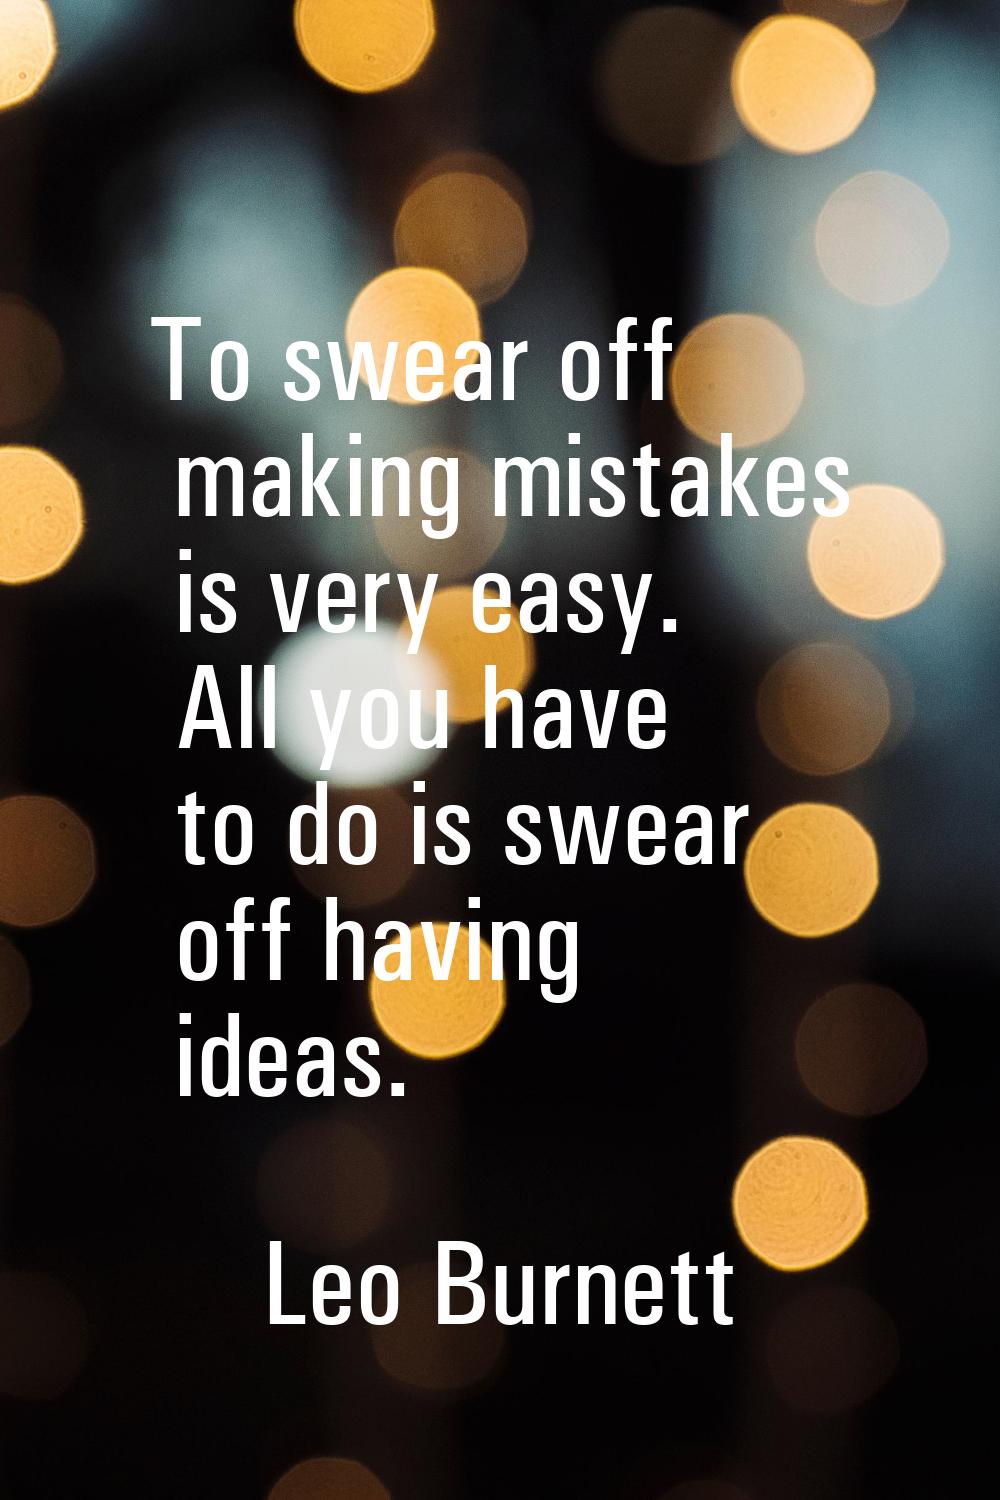 To swear off making mistakes is very easy. All you have to do is swear off having ideas.